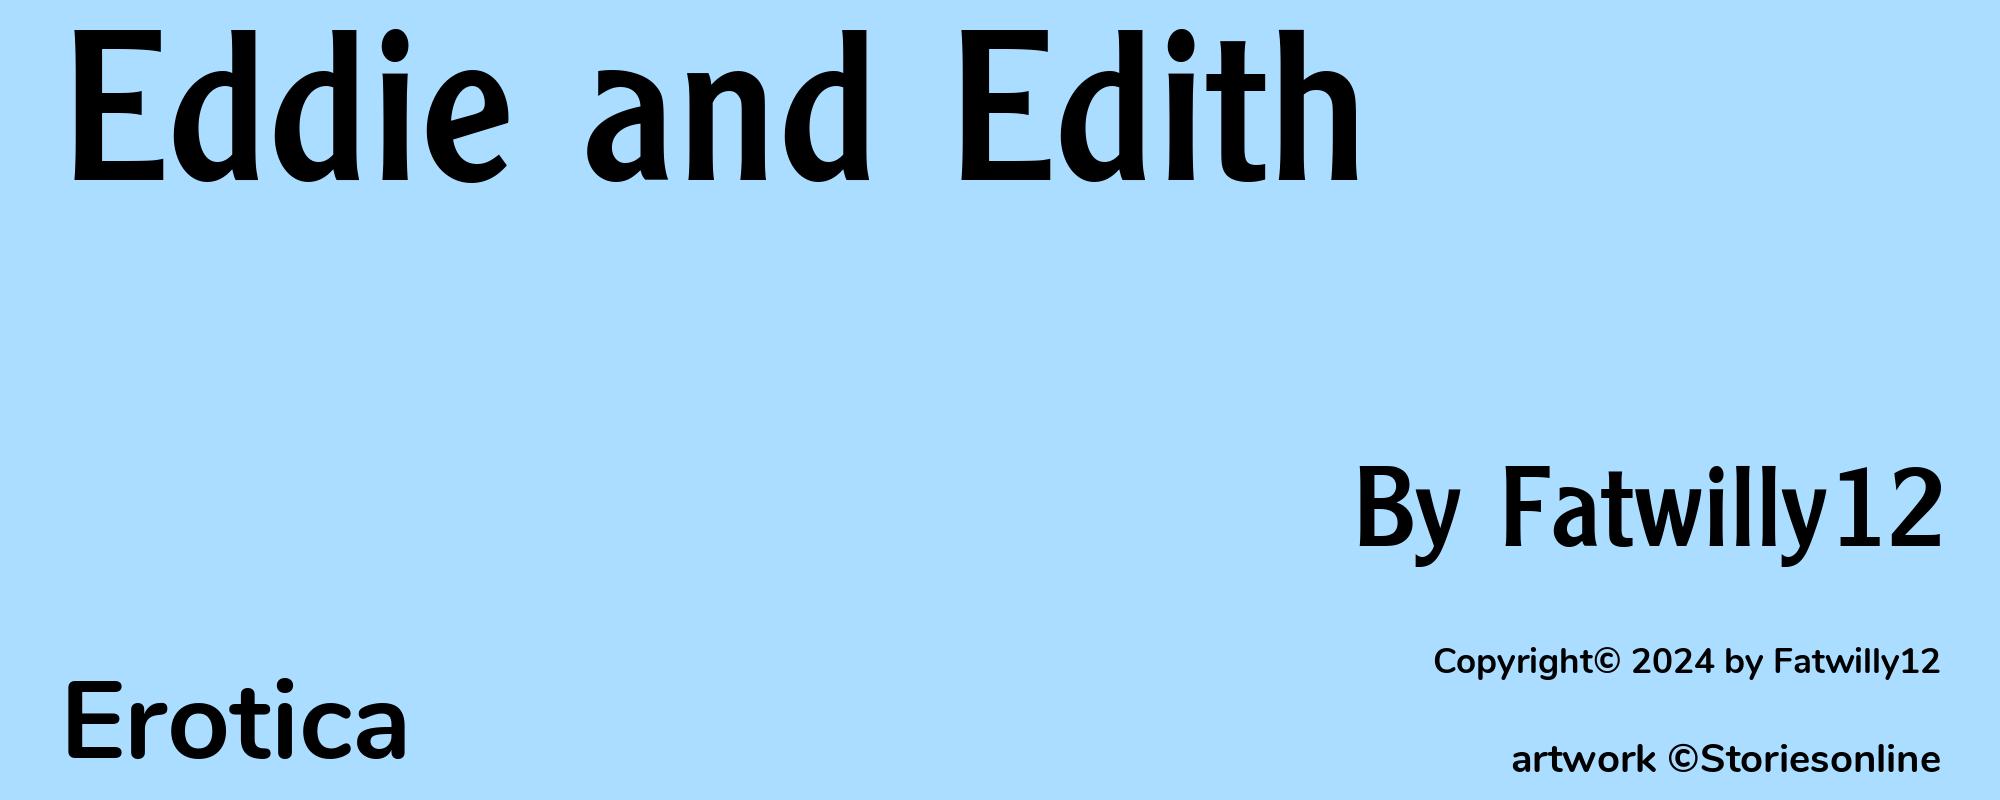 Eddie and Edith - Cover